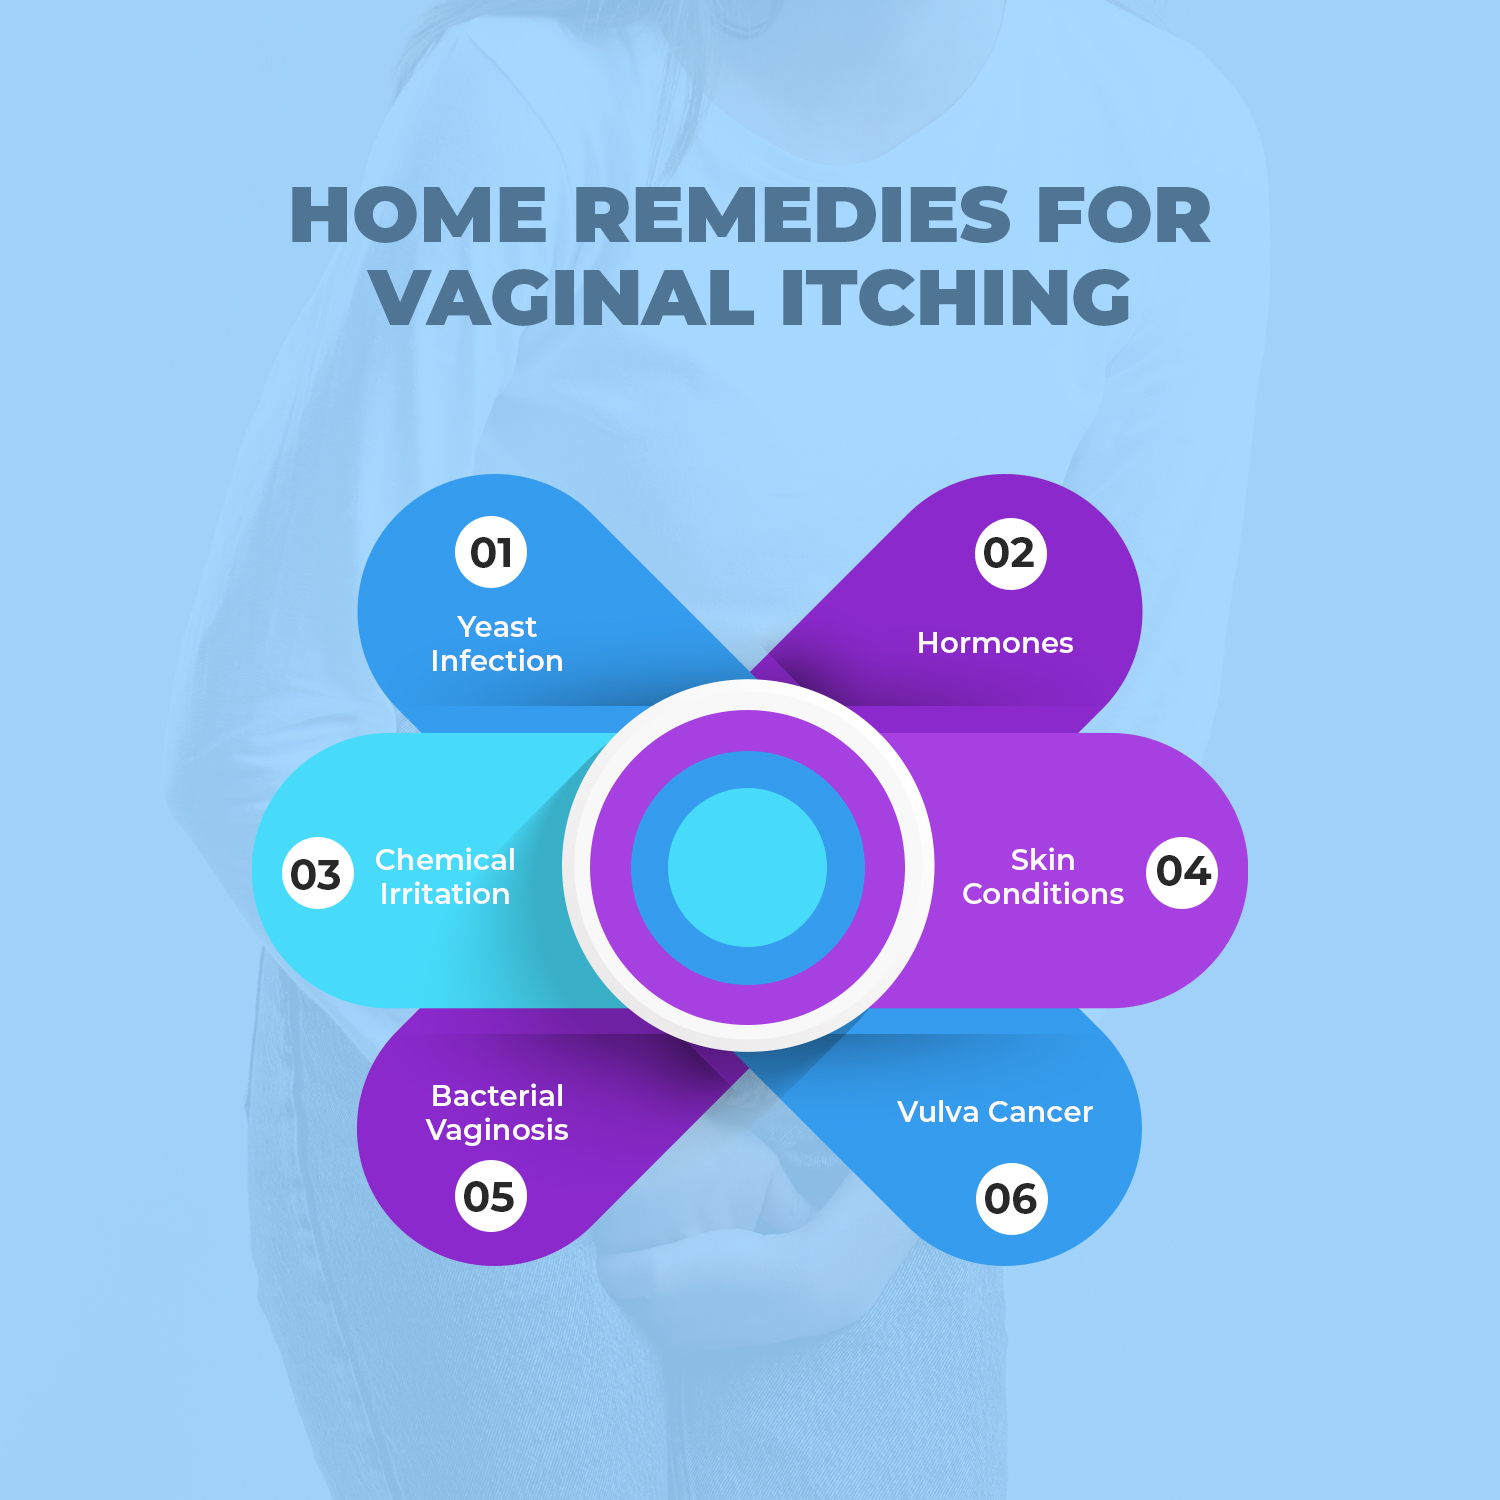 Home remedies for vaginal itching